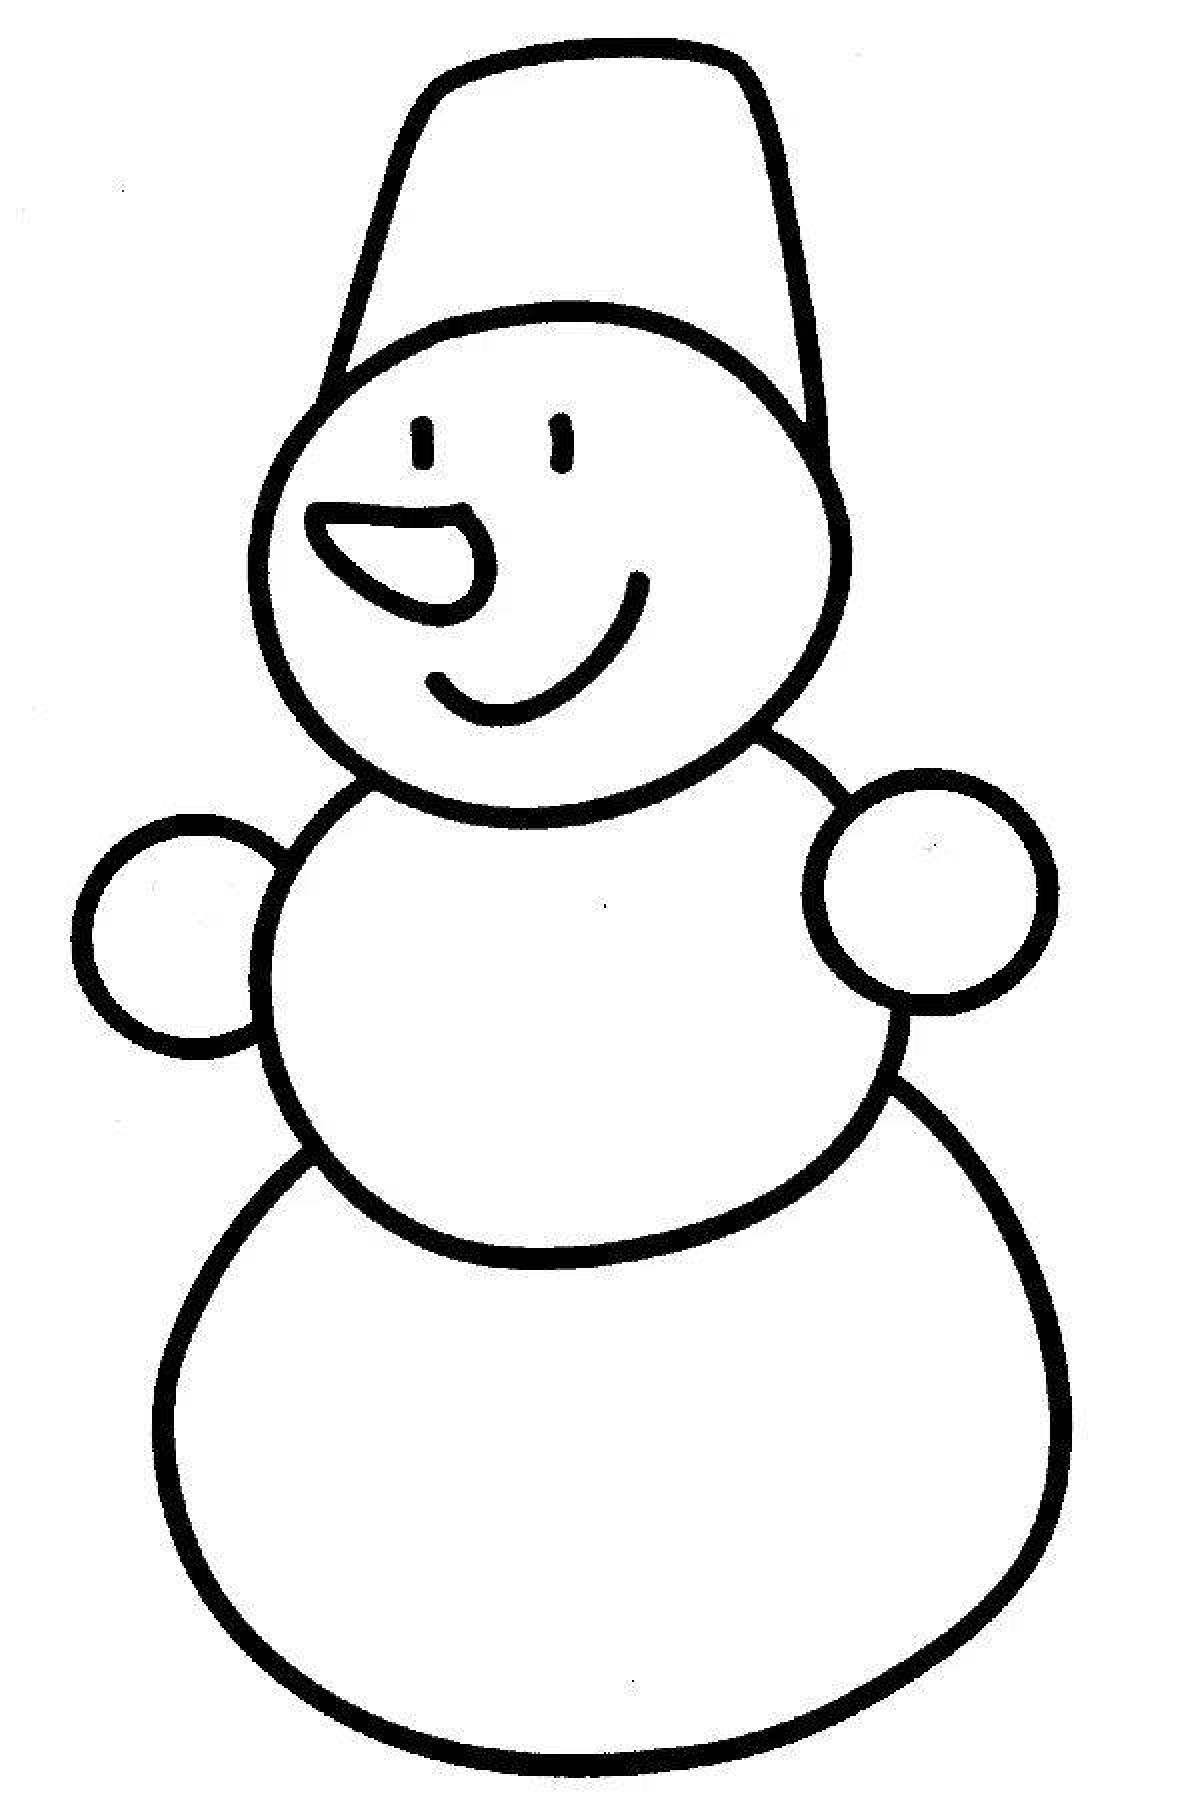 Great snowman coloring book